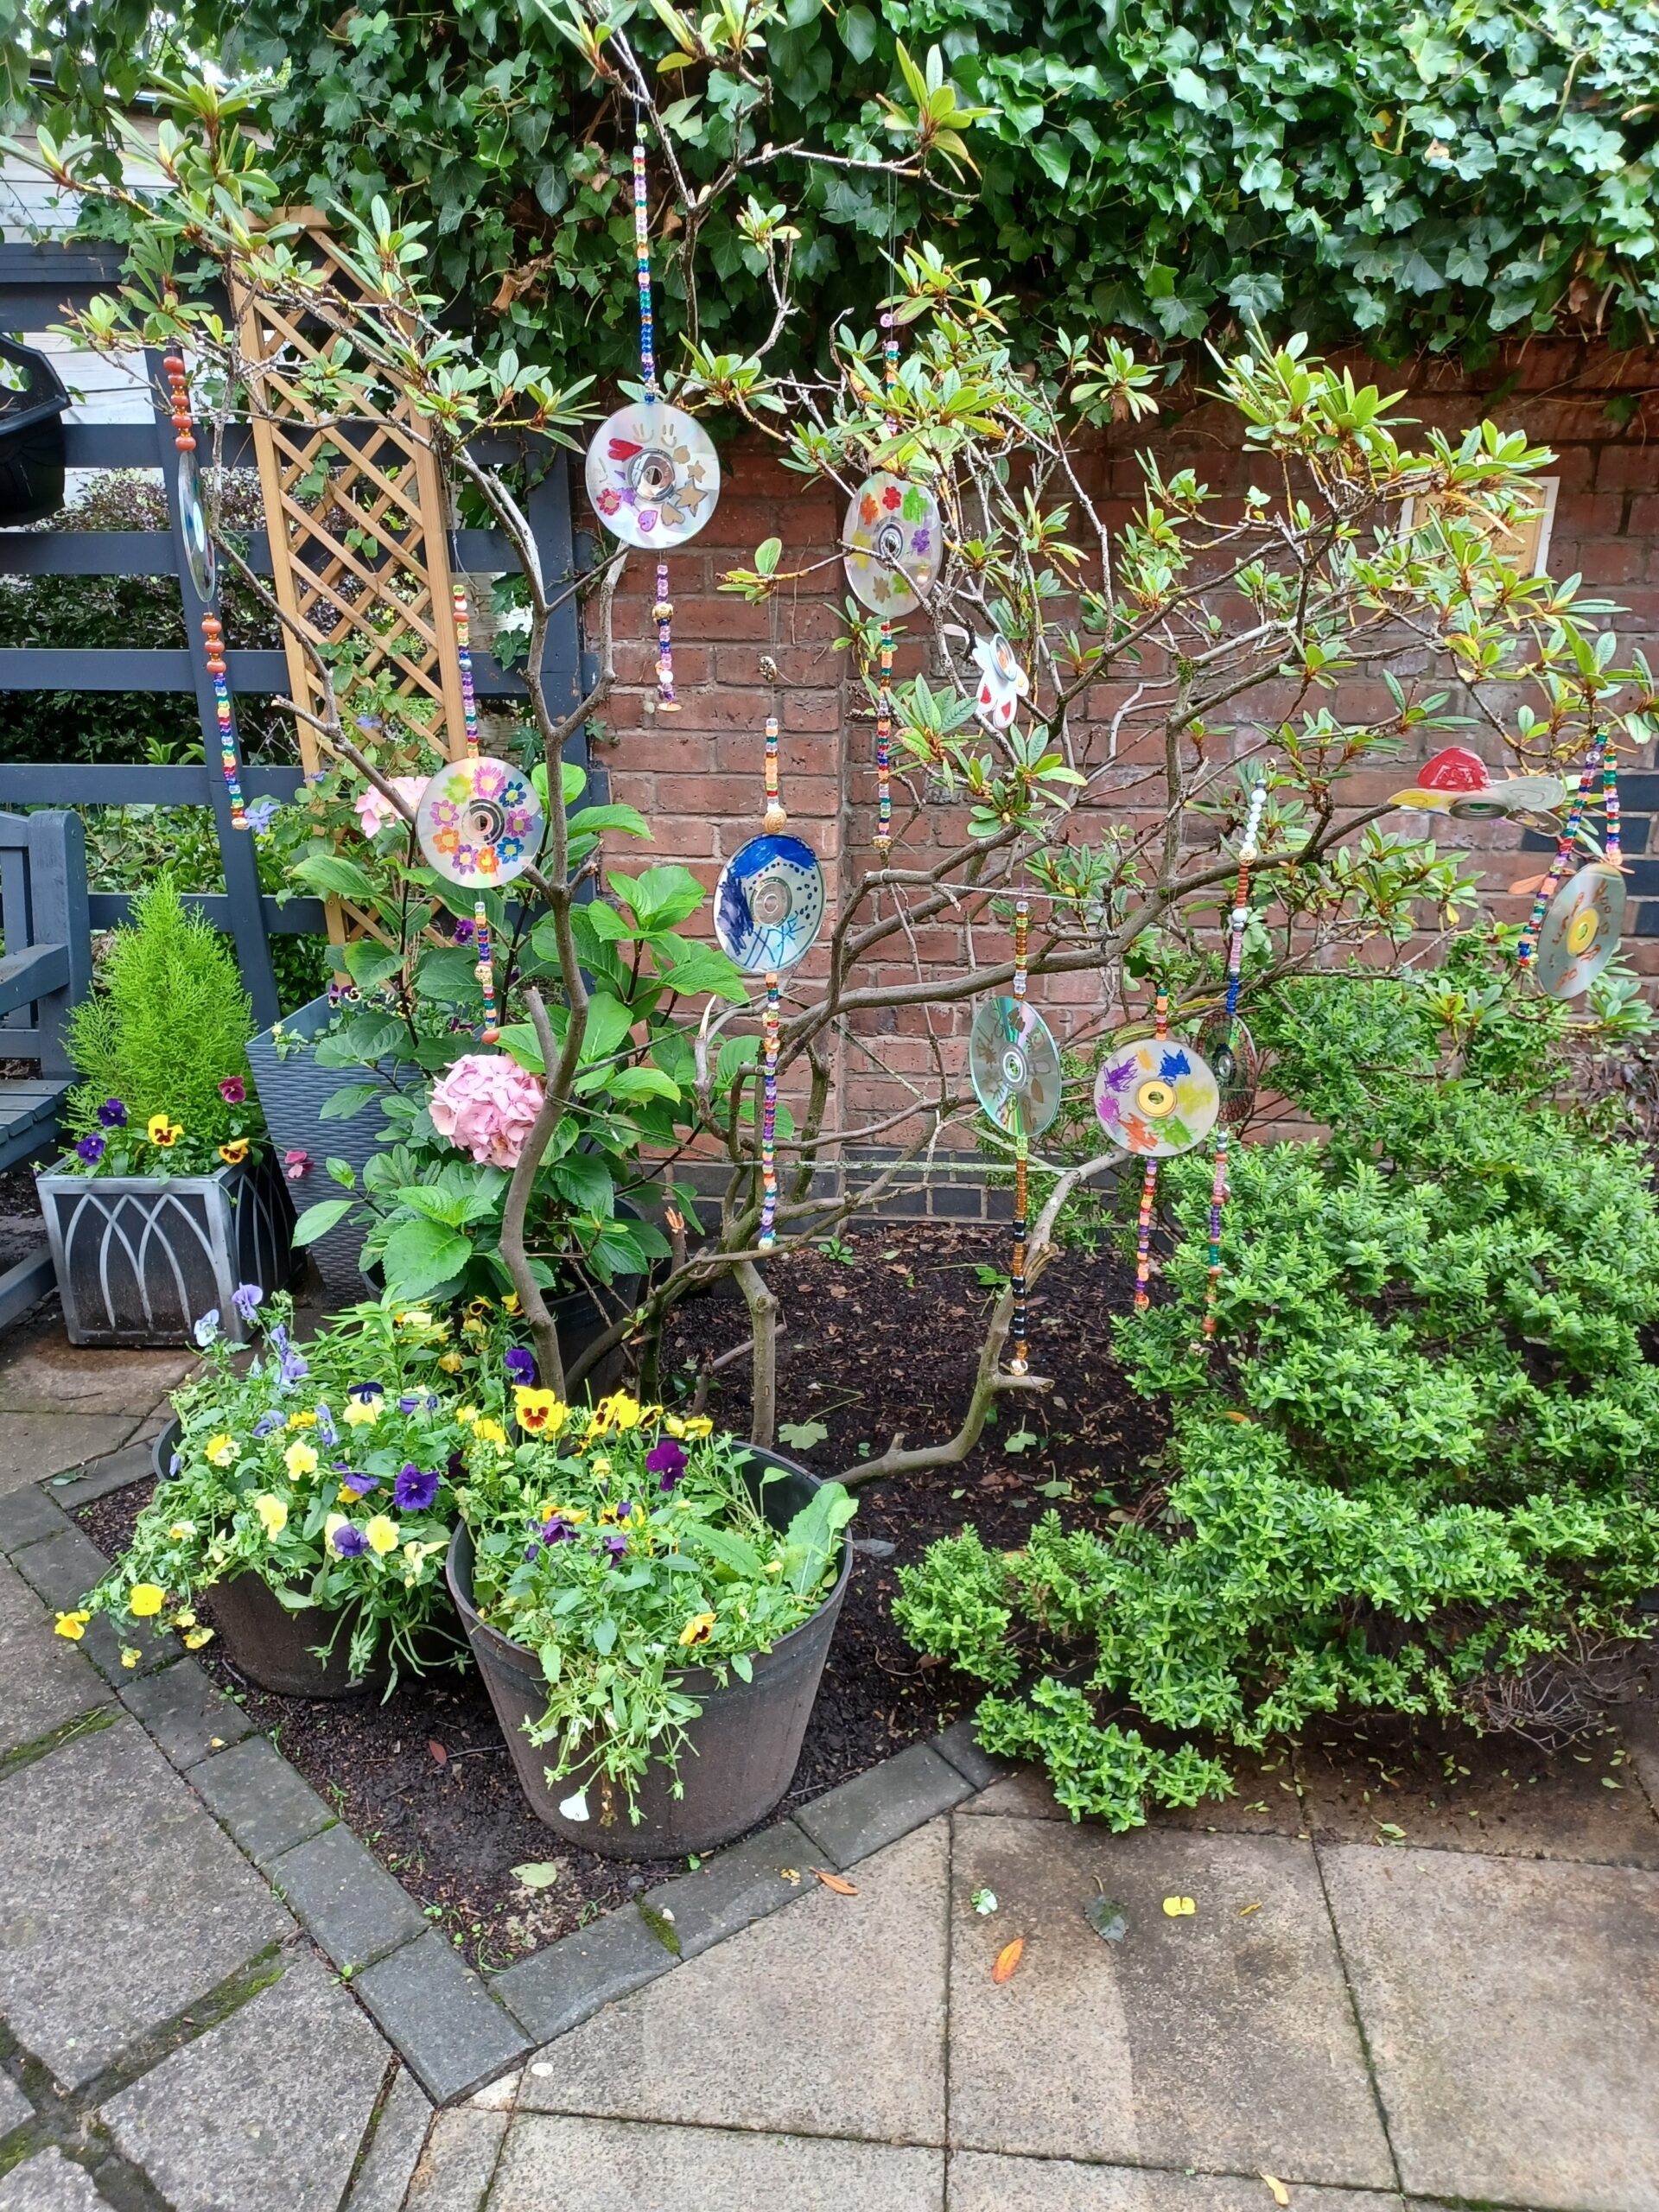 Painted CDs hanging from small trees.